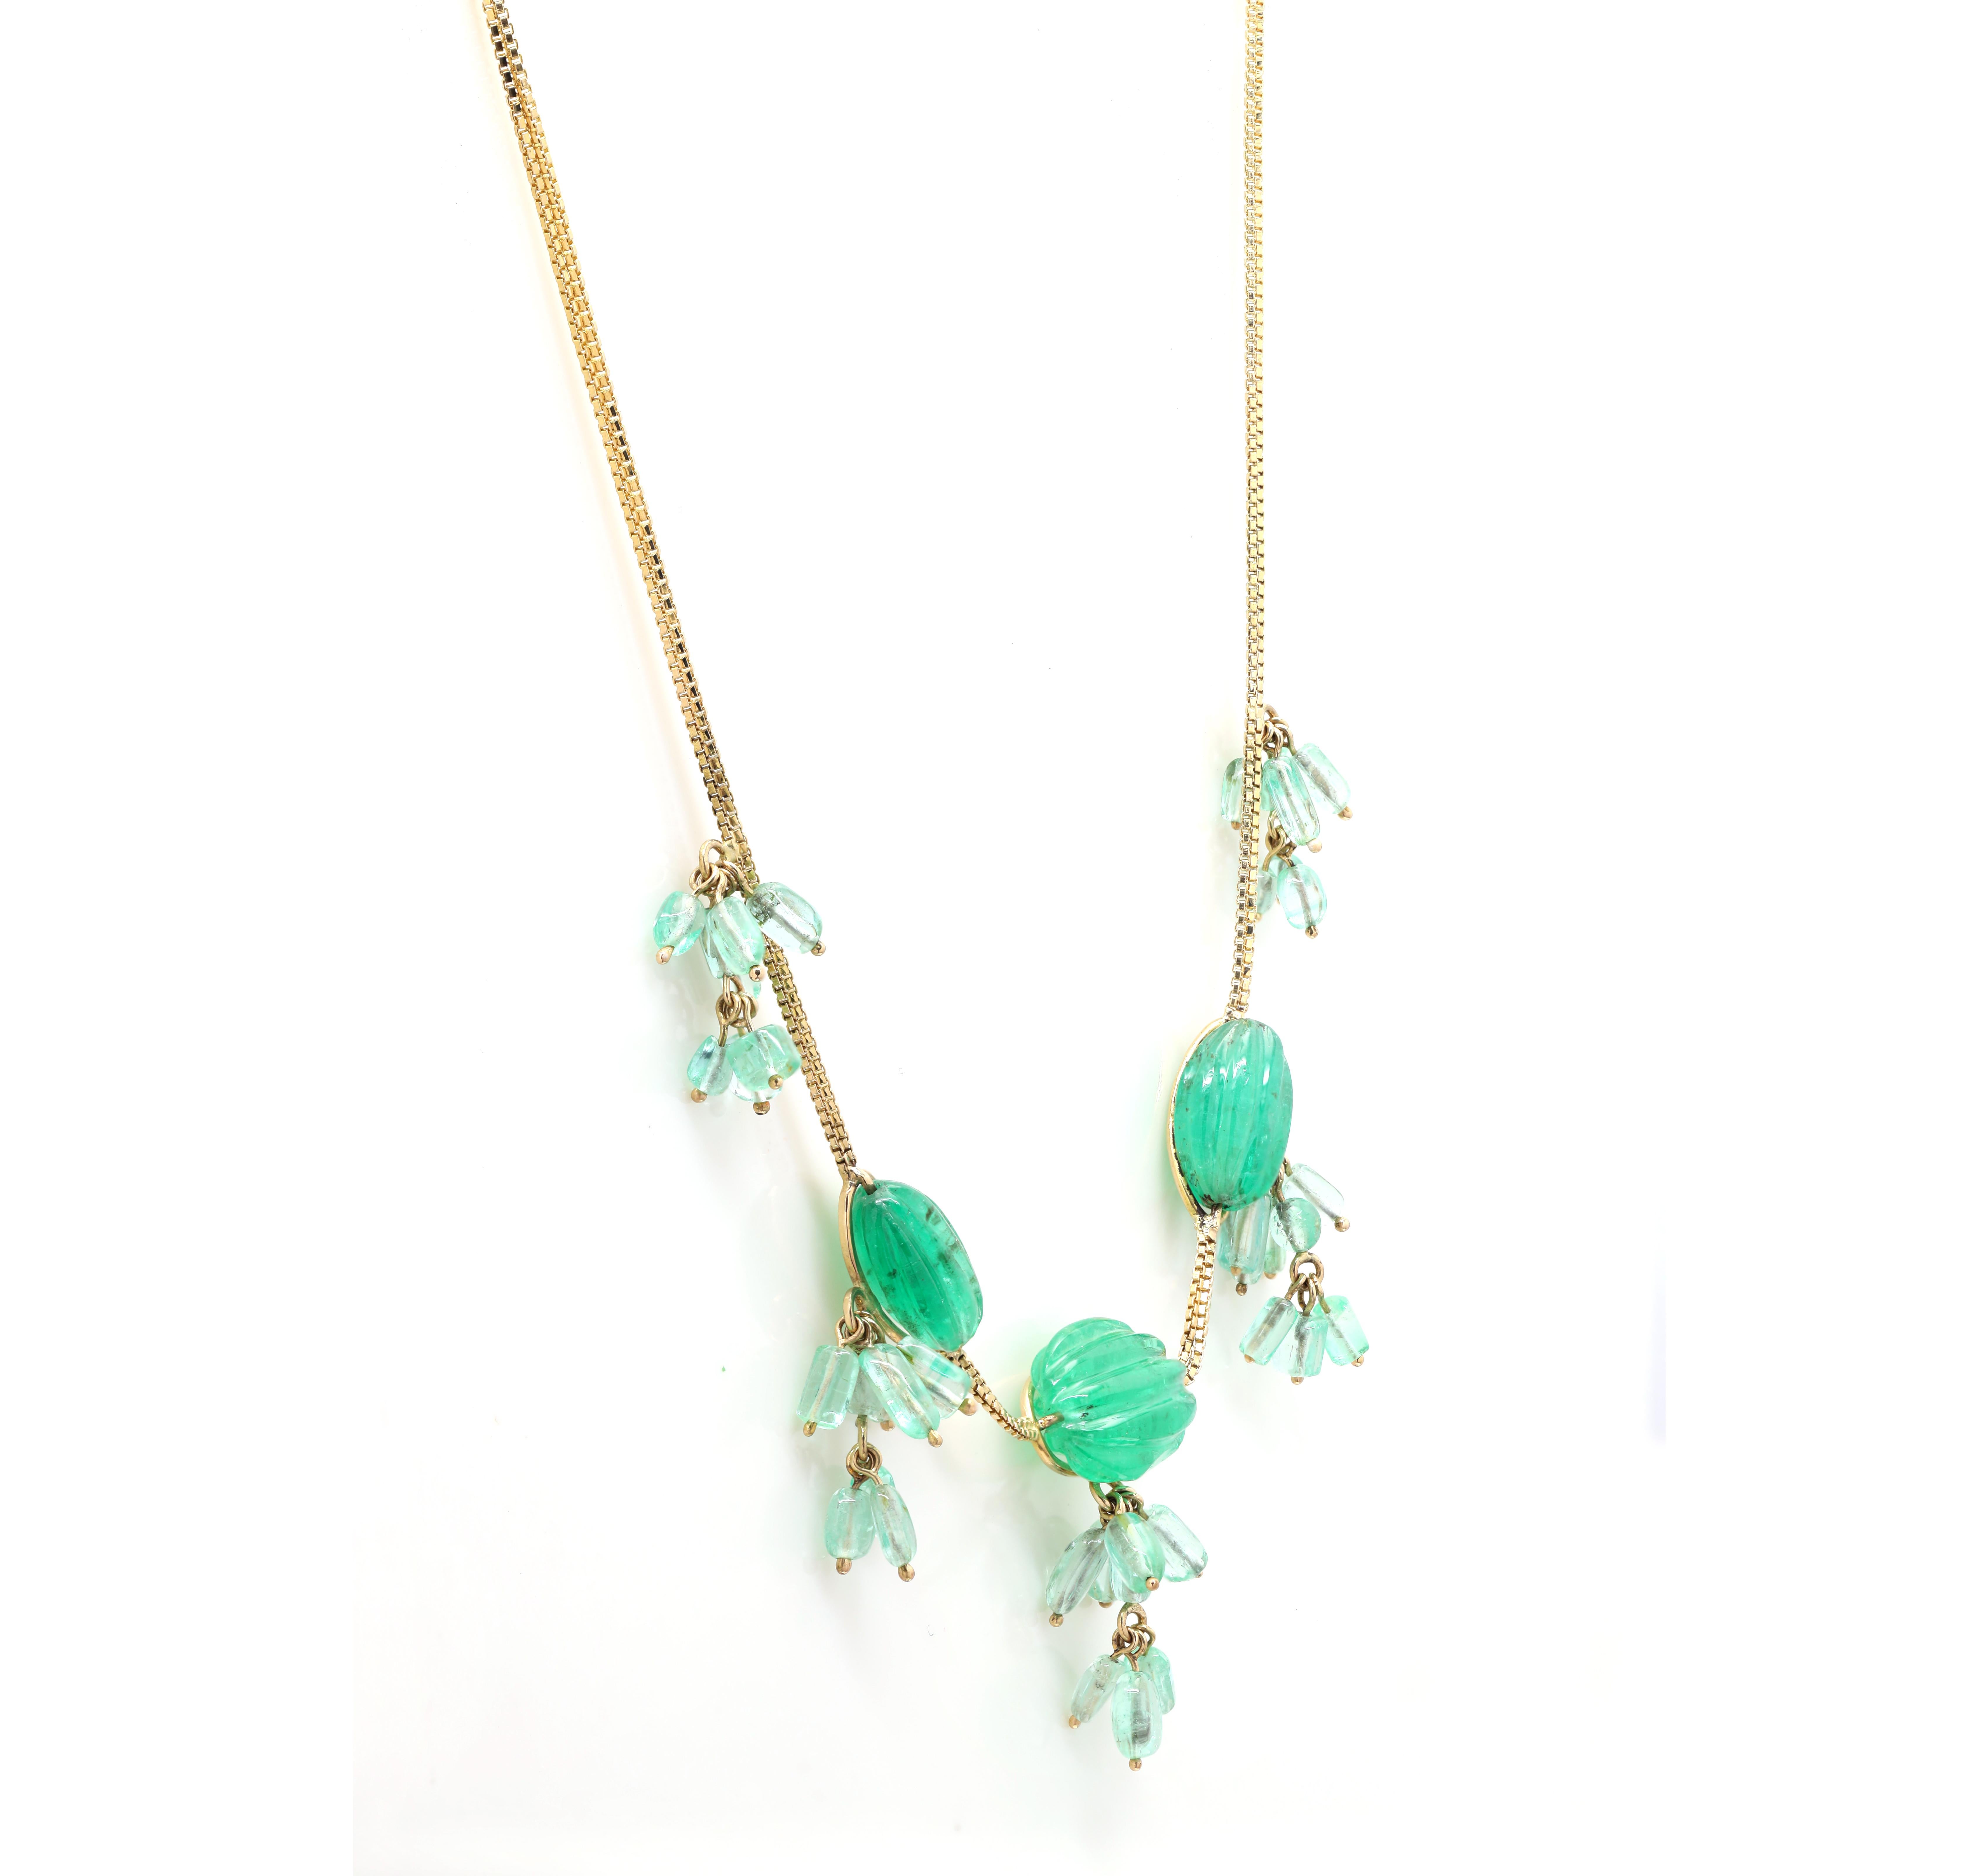 Artist Contemporary Beaded 23.7ct Emerald Chain Necklace in 18k Solid Yellow Gold